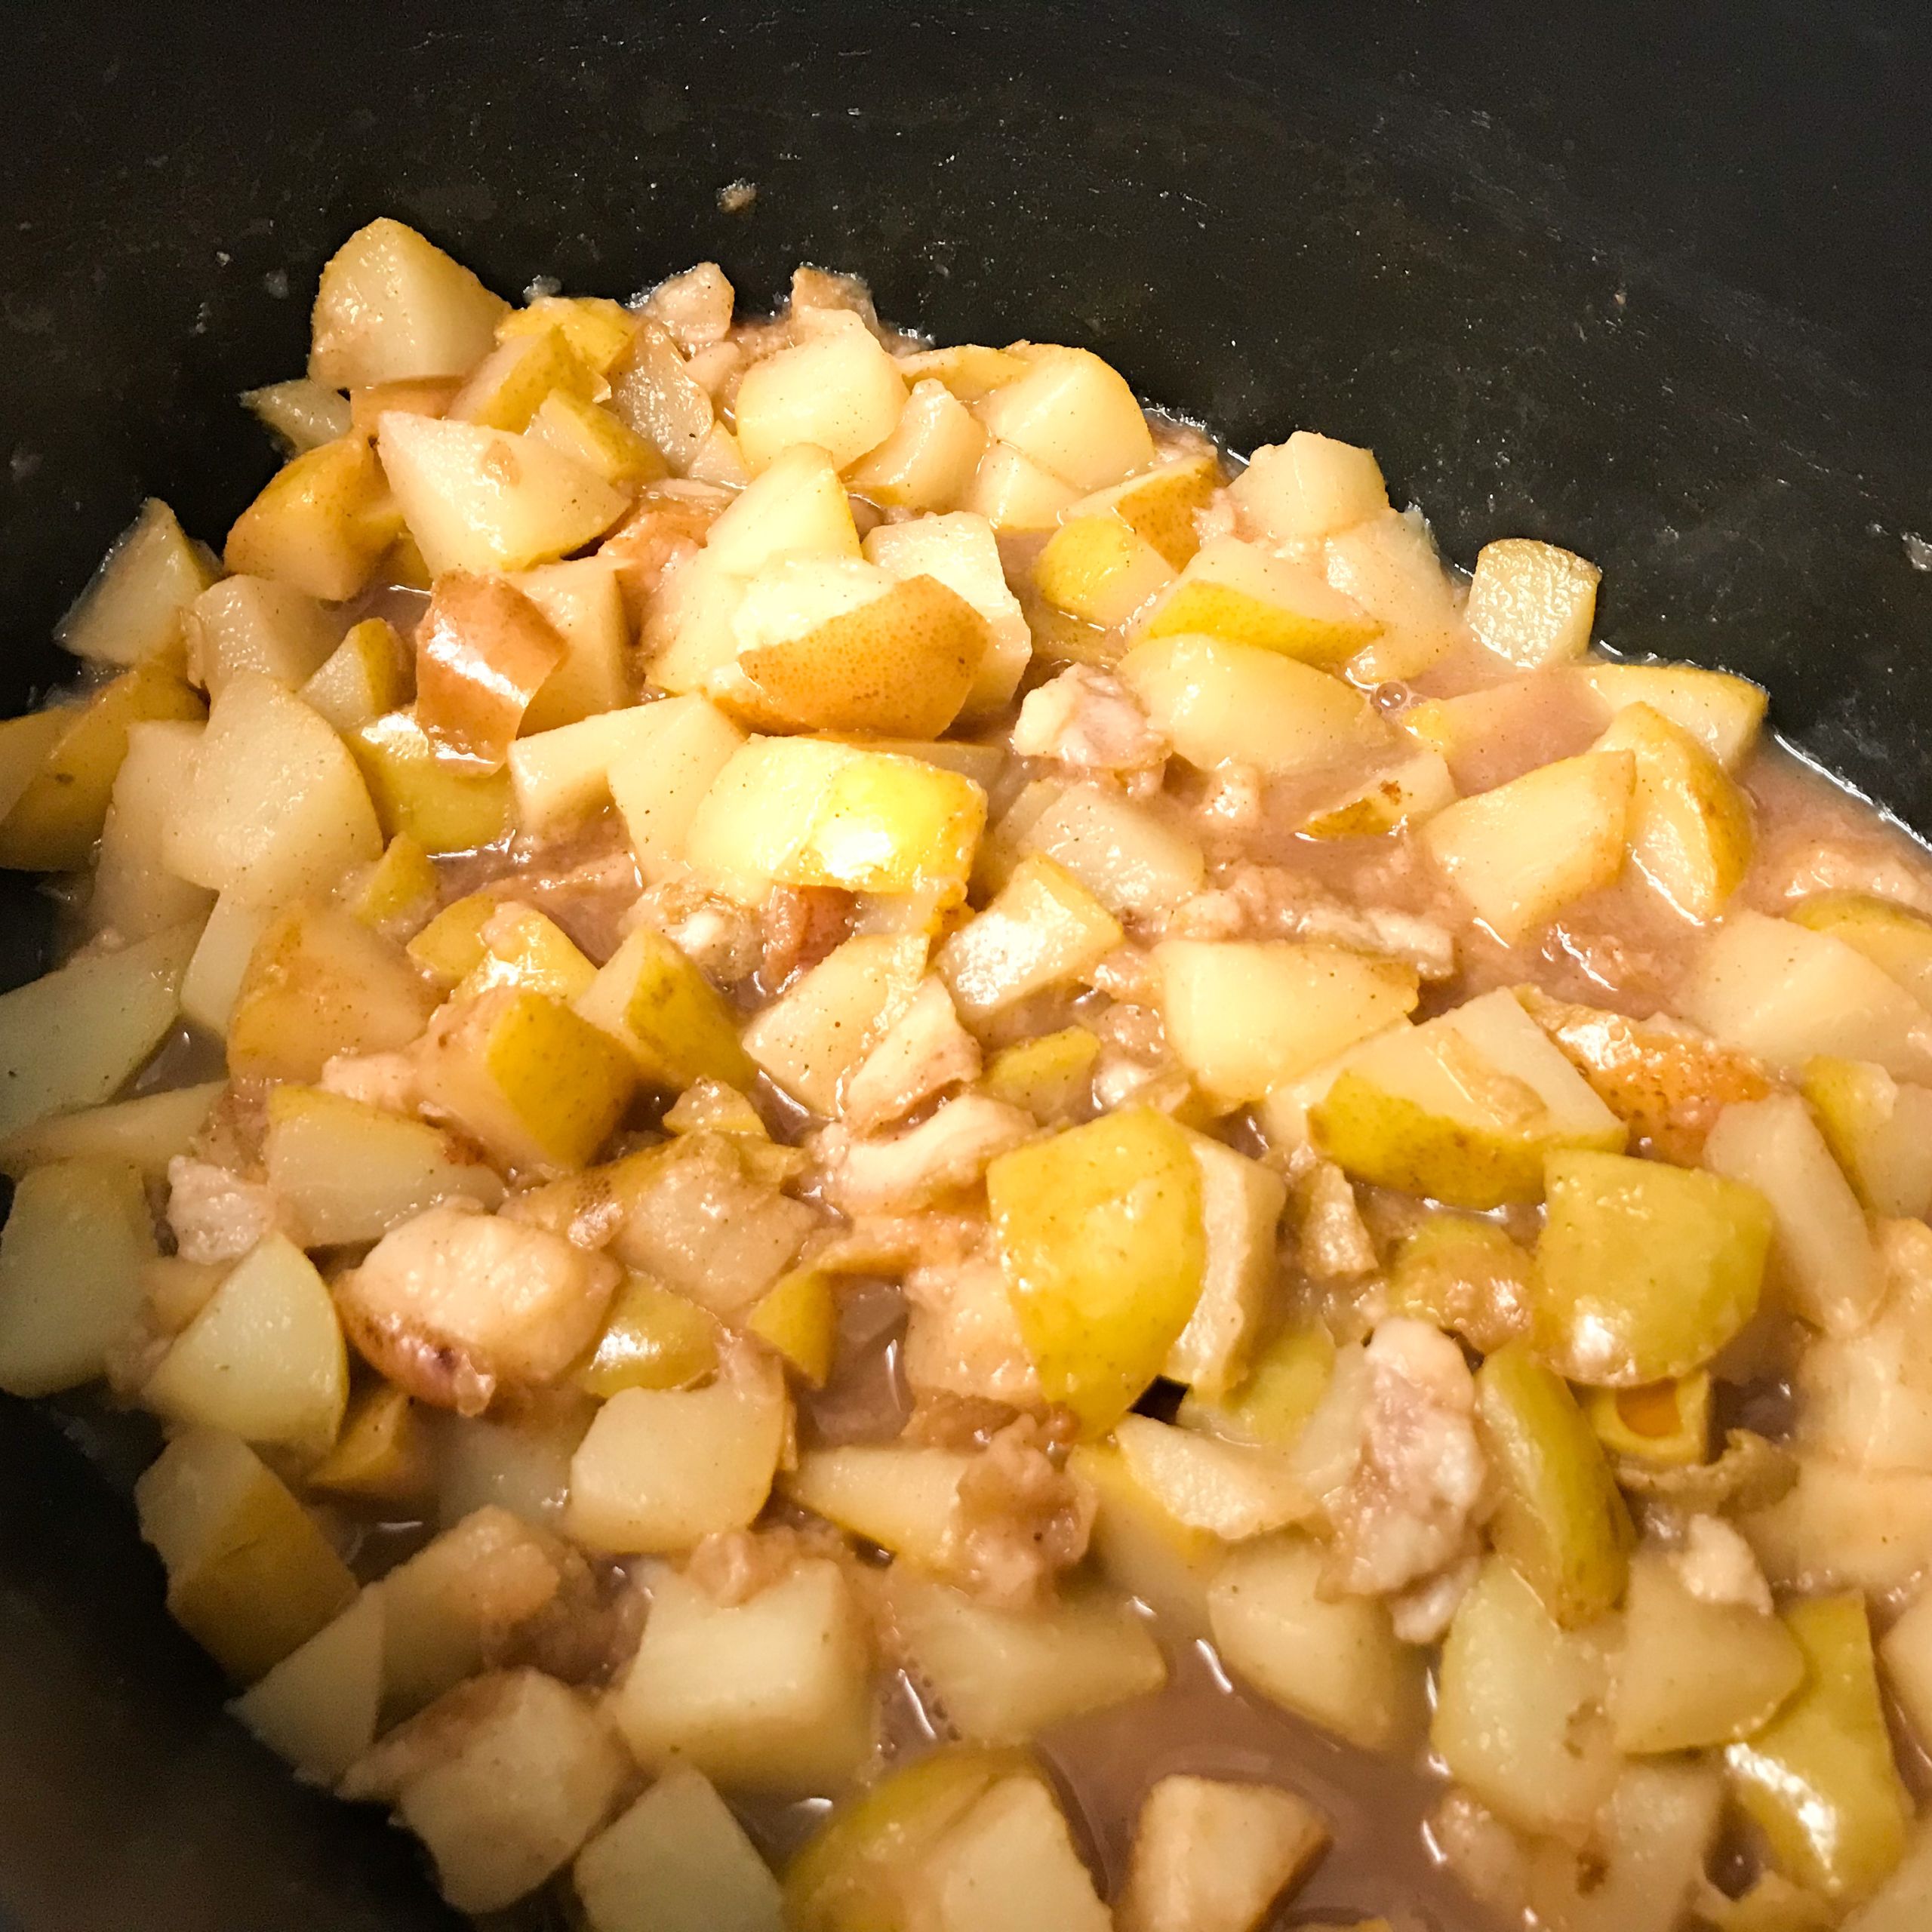 cooked down pears | mycuratedtastes